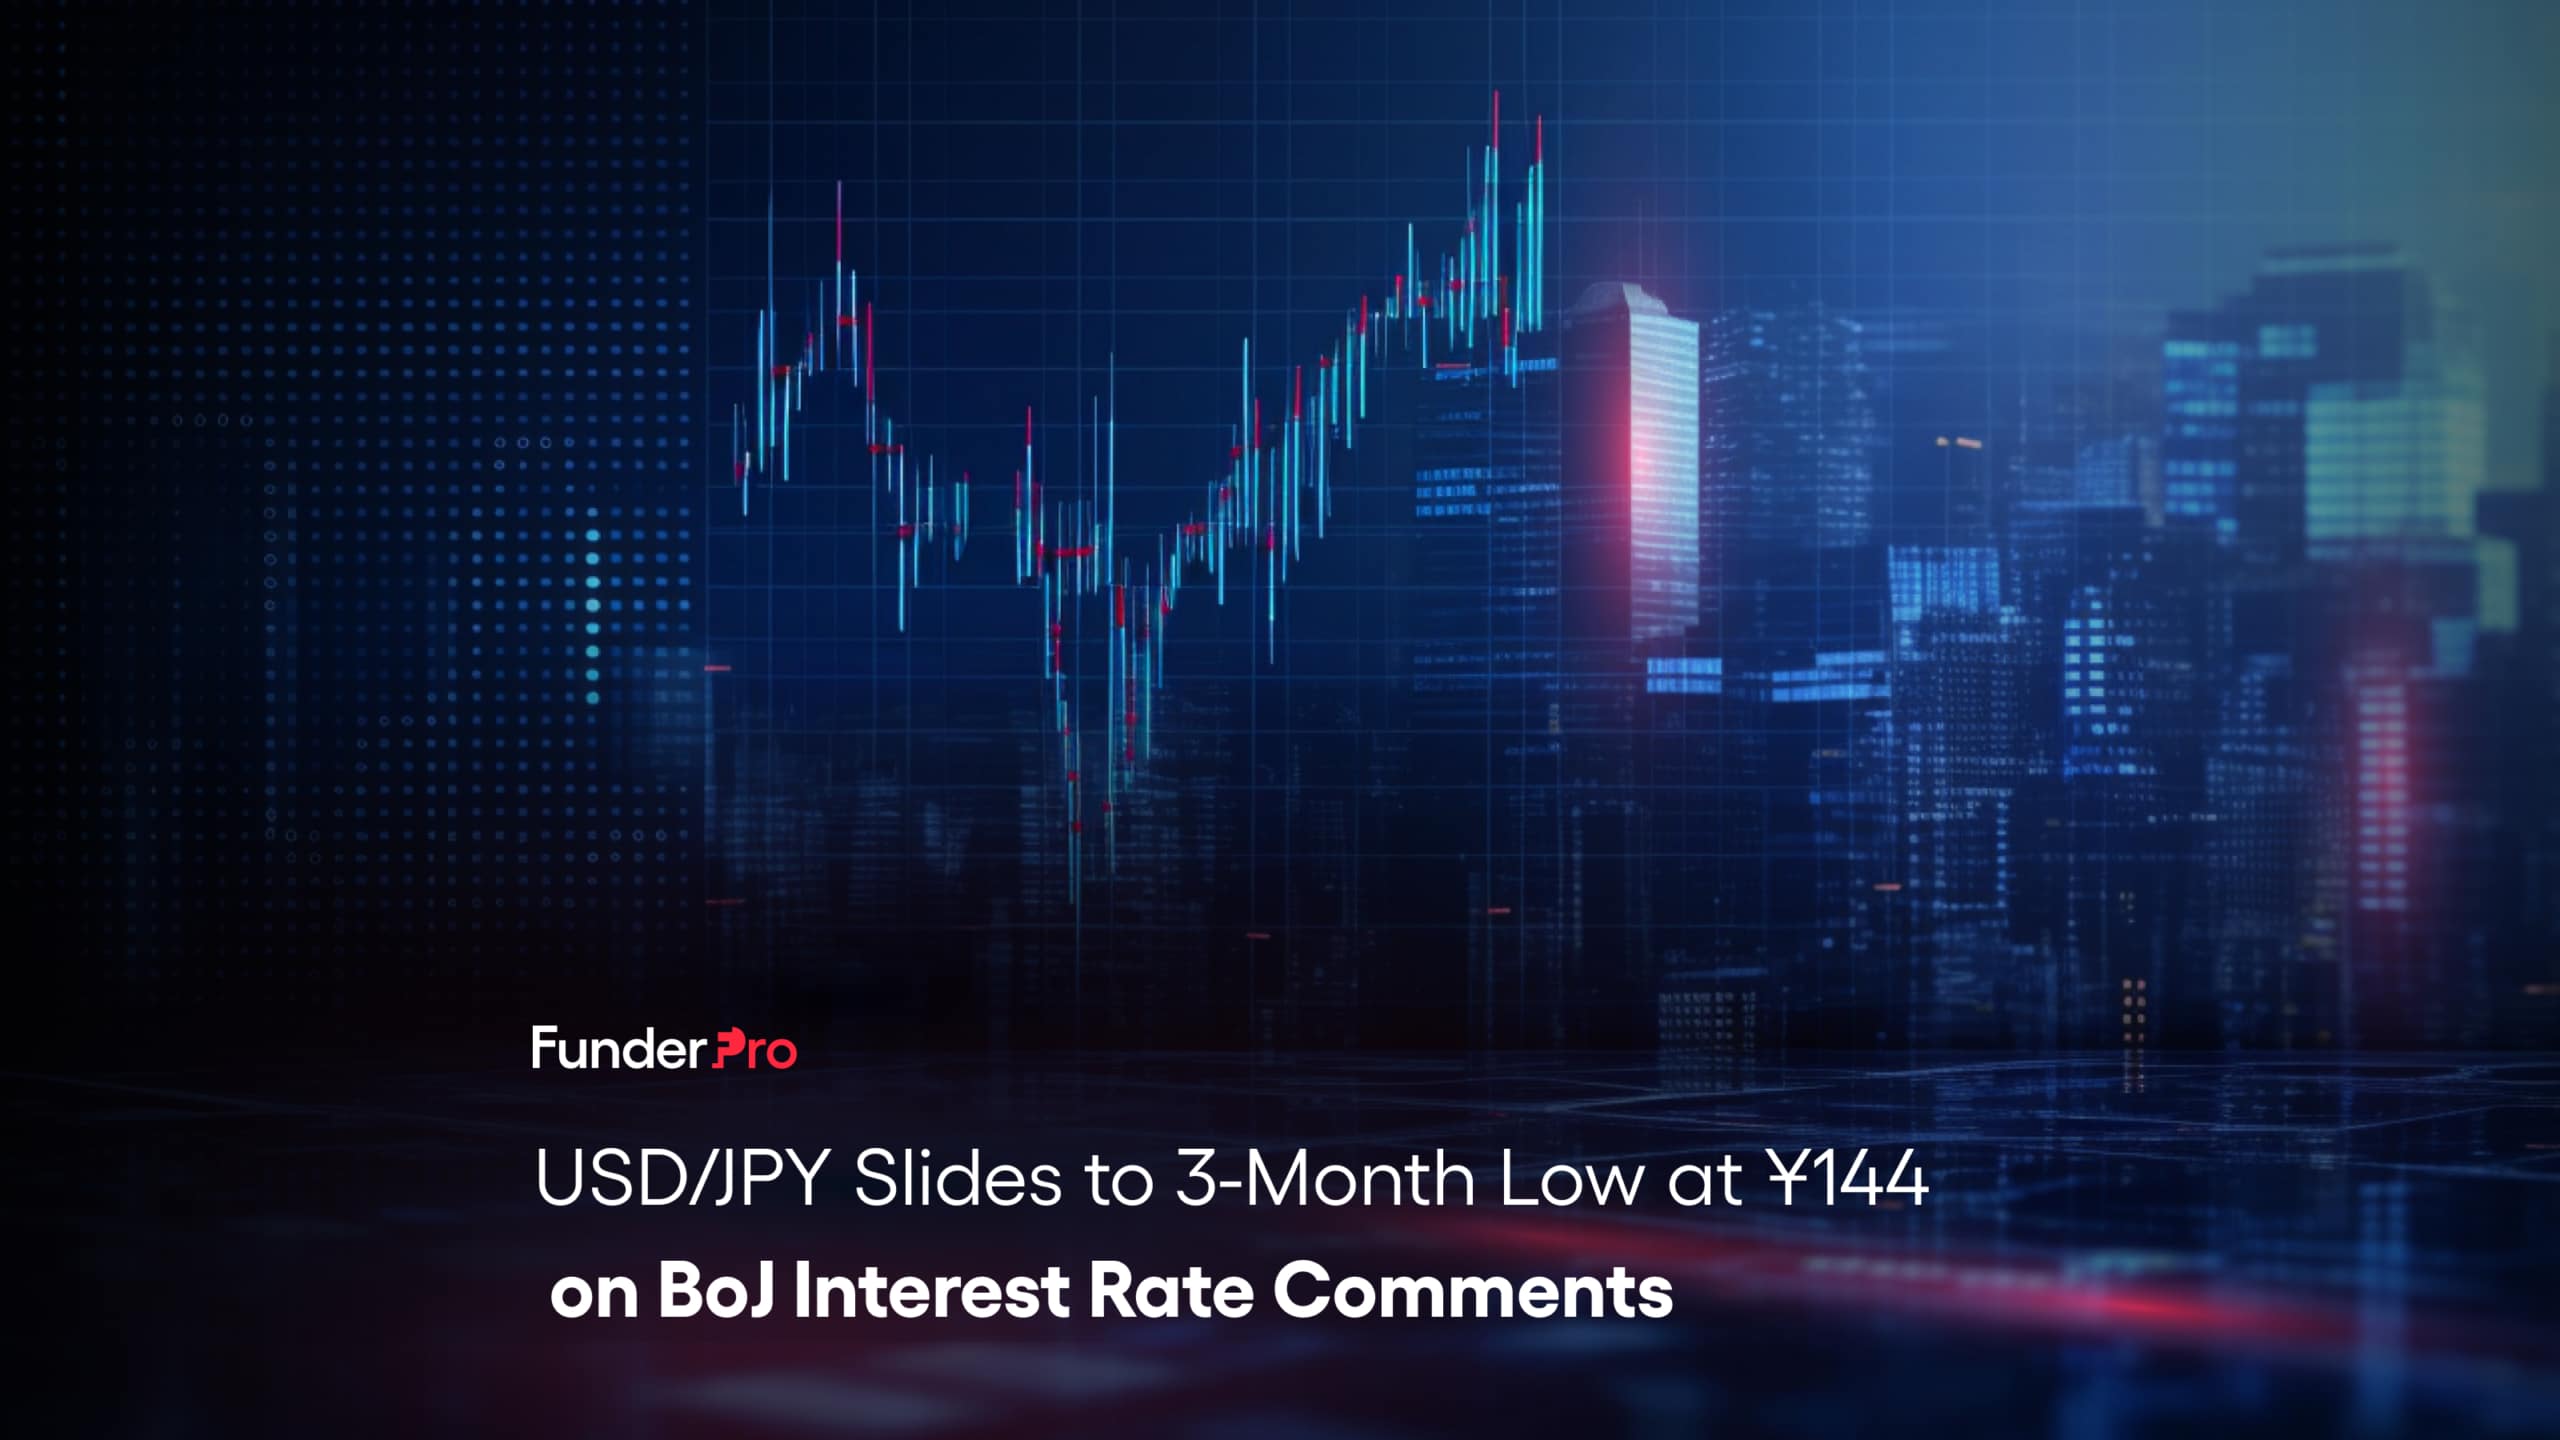 USD/JPY Slides to 3-Month Low at ¥144 on BoJ Interest Rate Comments